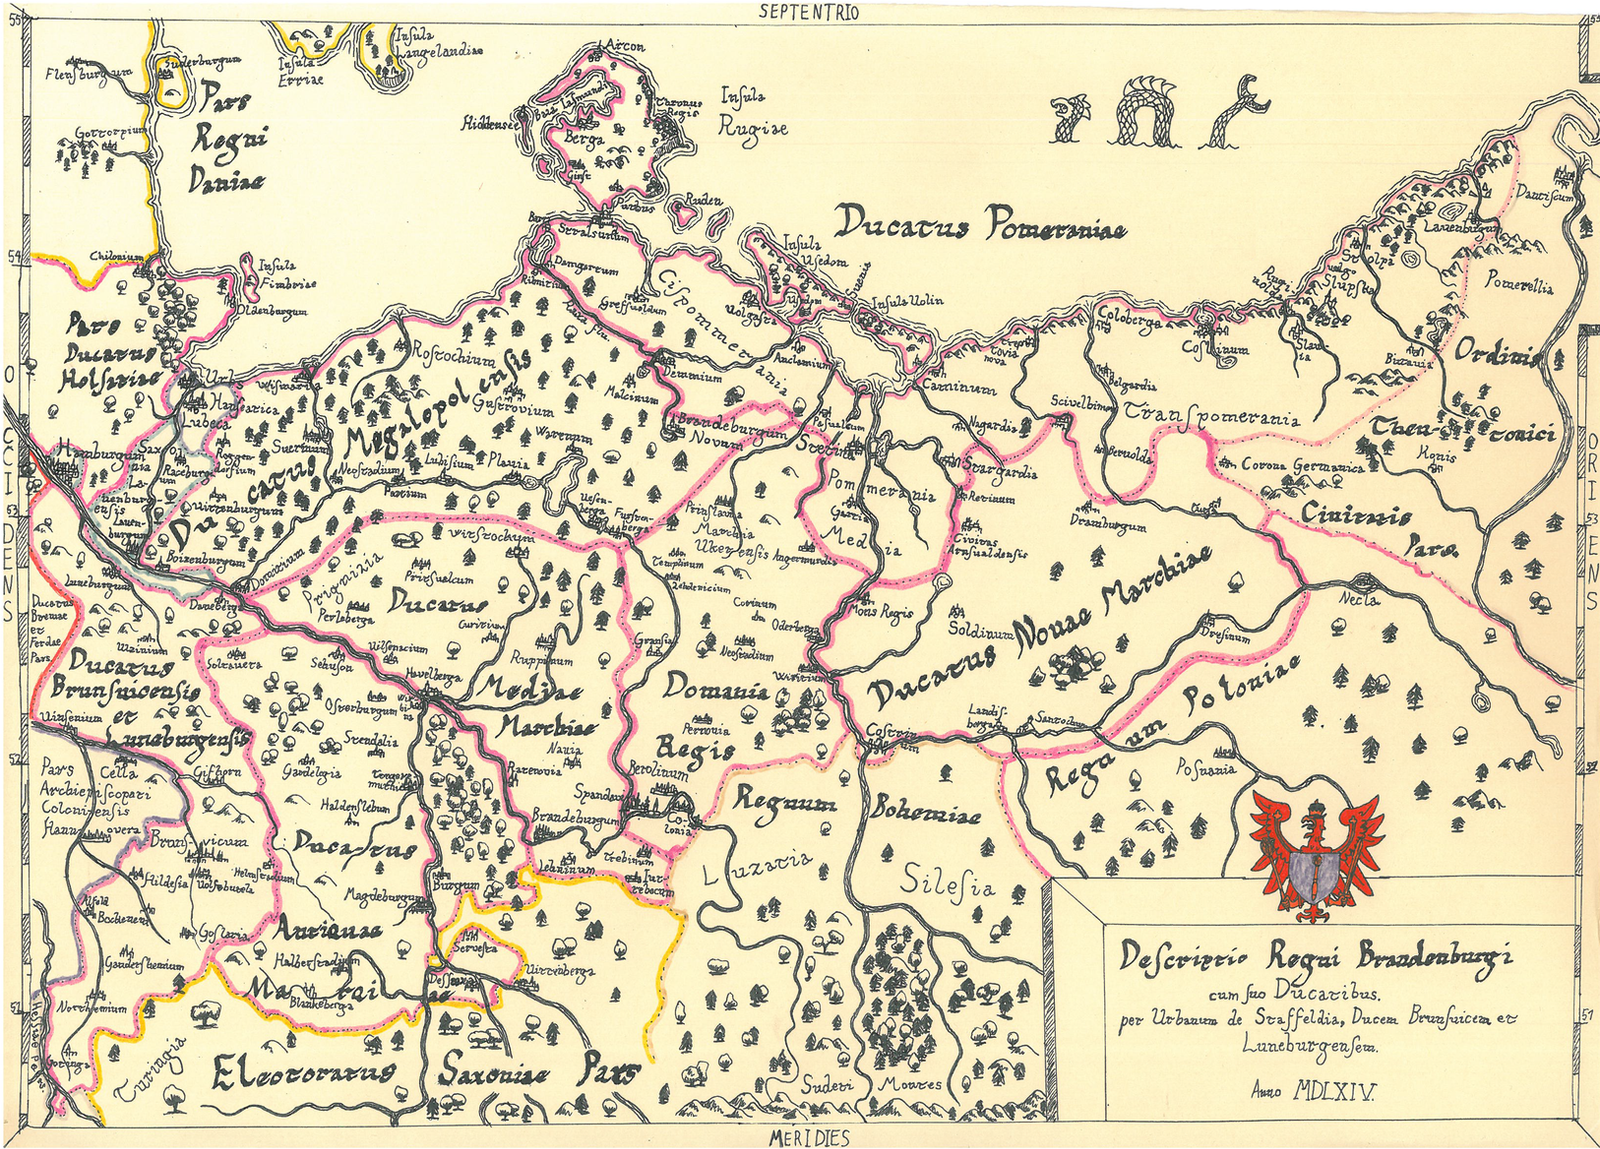 map_of_the_kingdom_of_brandenburg_with_its_duchies_by_formatorius-d8qf5dr.png